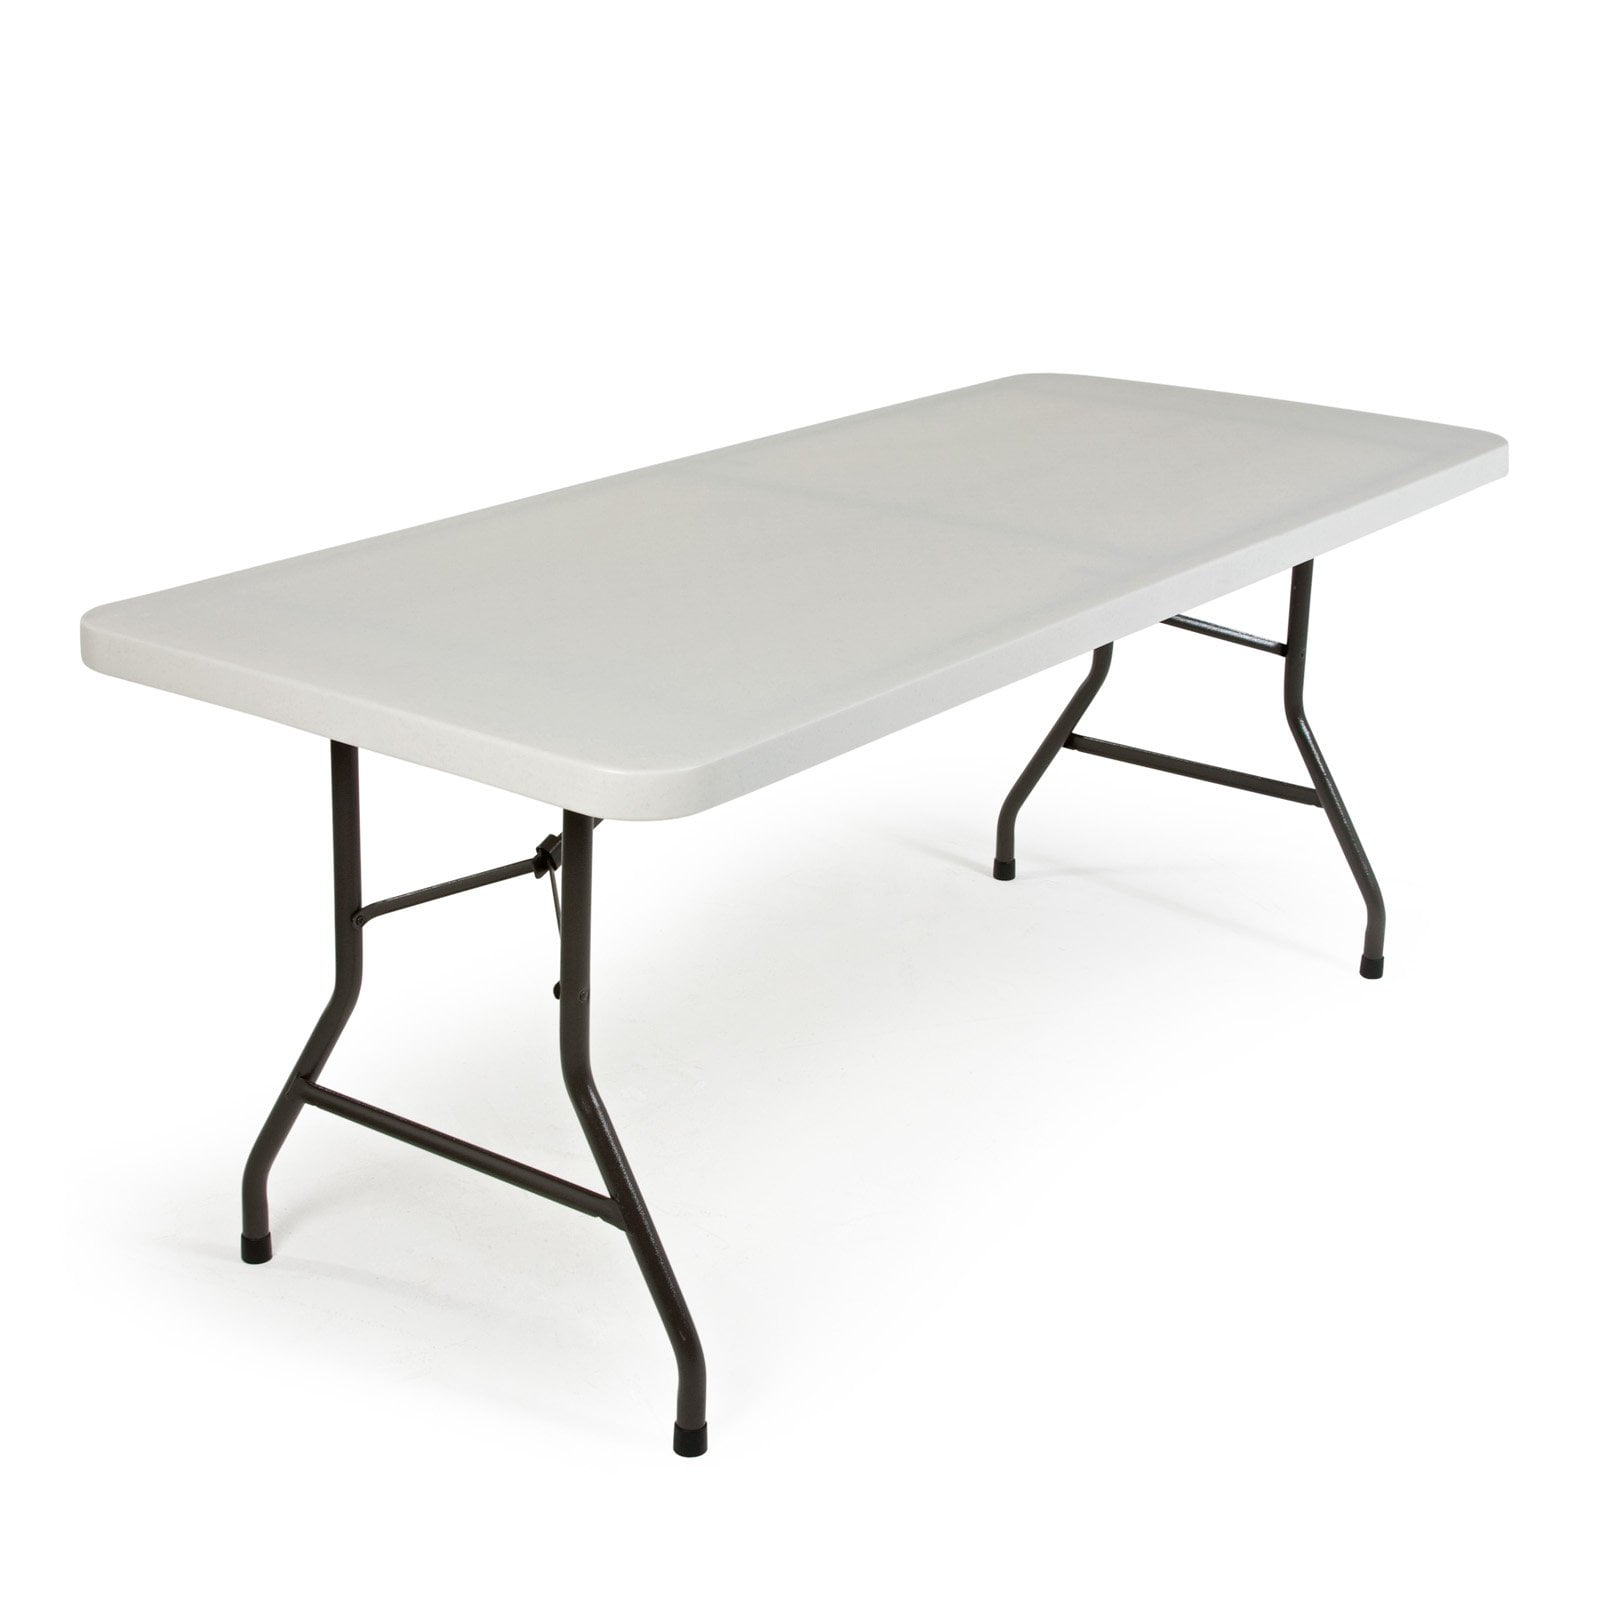 ZIMMER Personal Folding Table Sturdy And Durable Steel Frame Legs White 